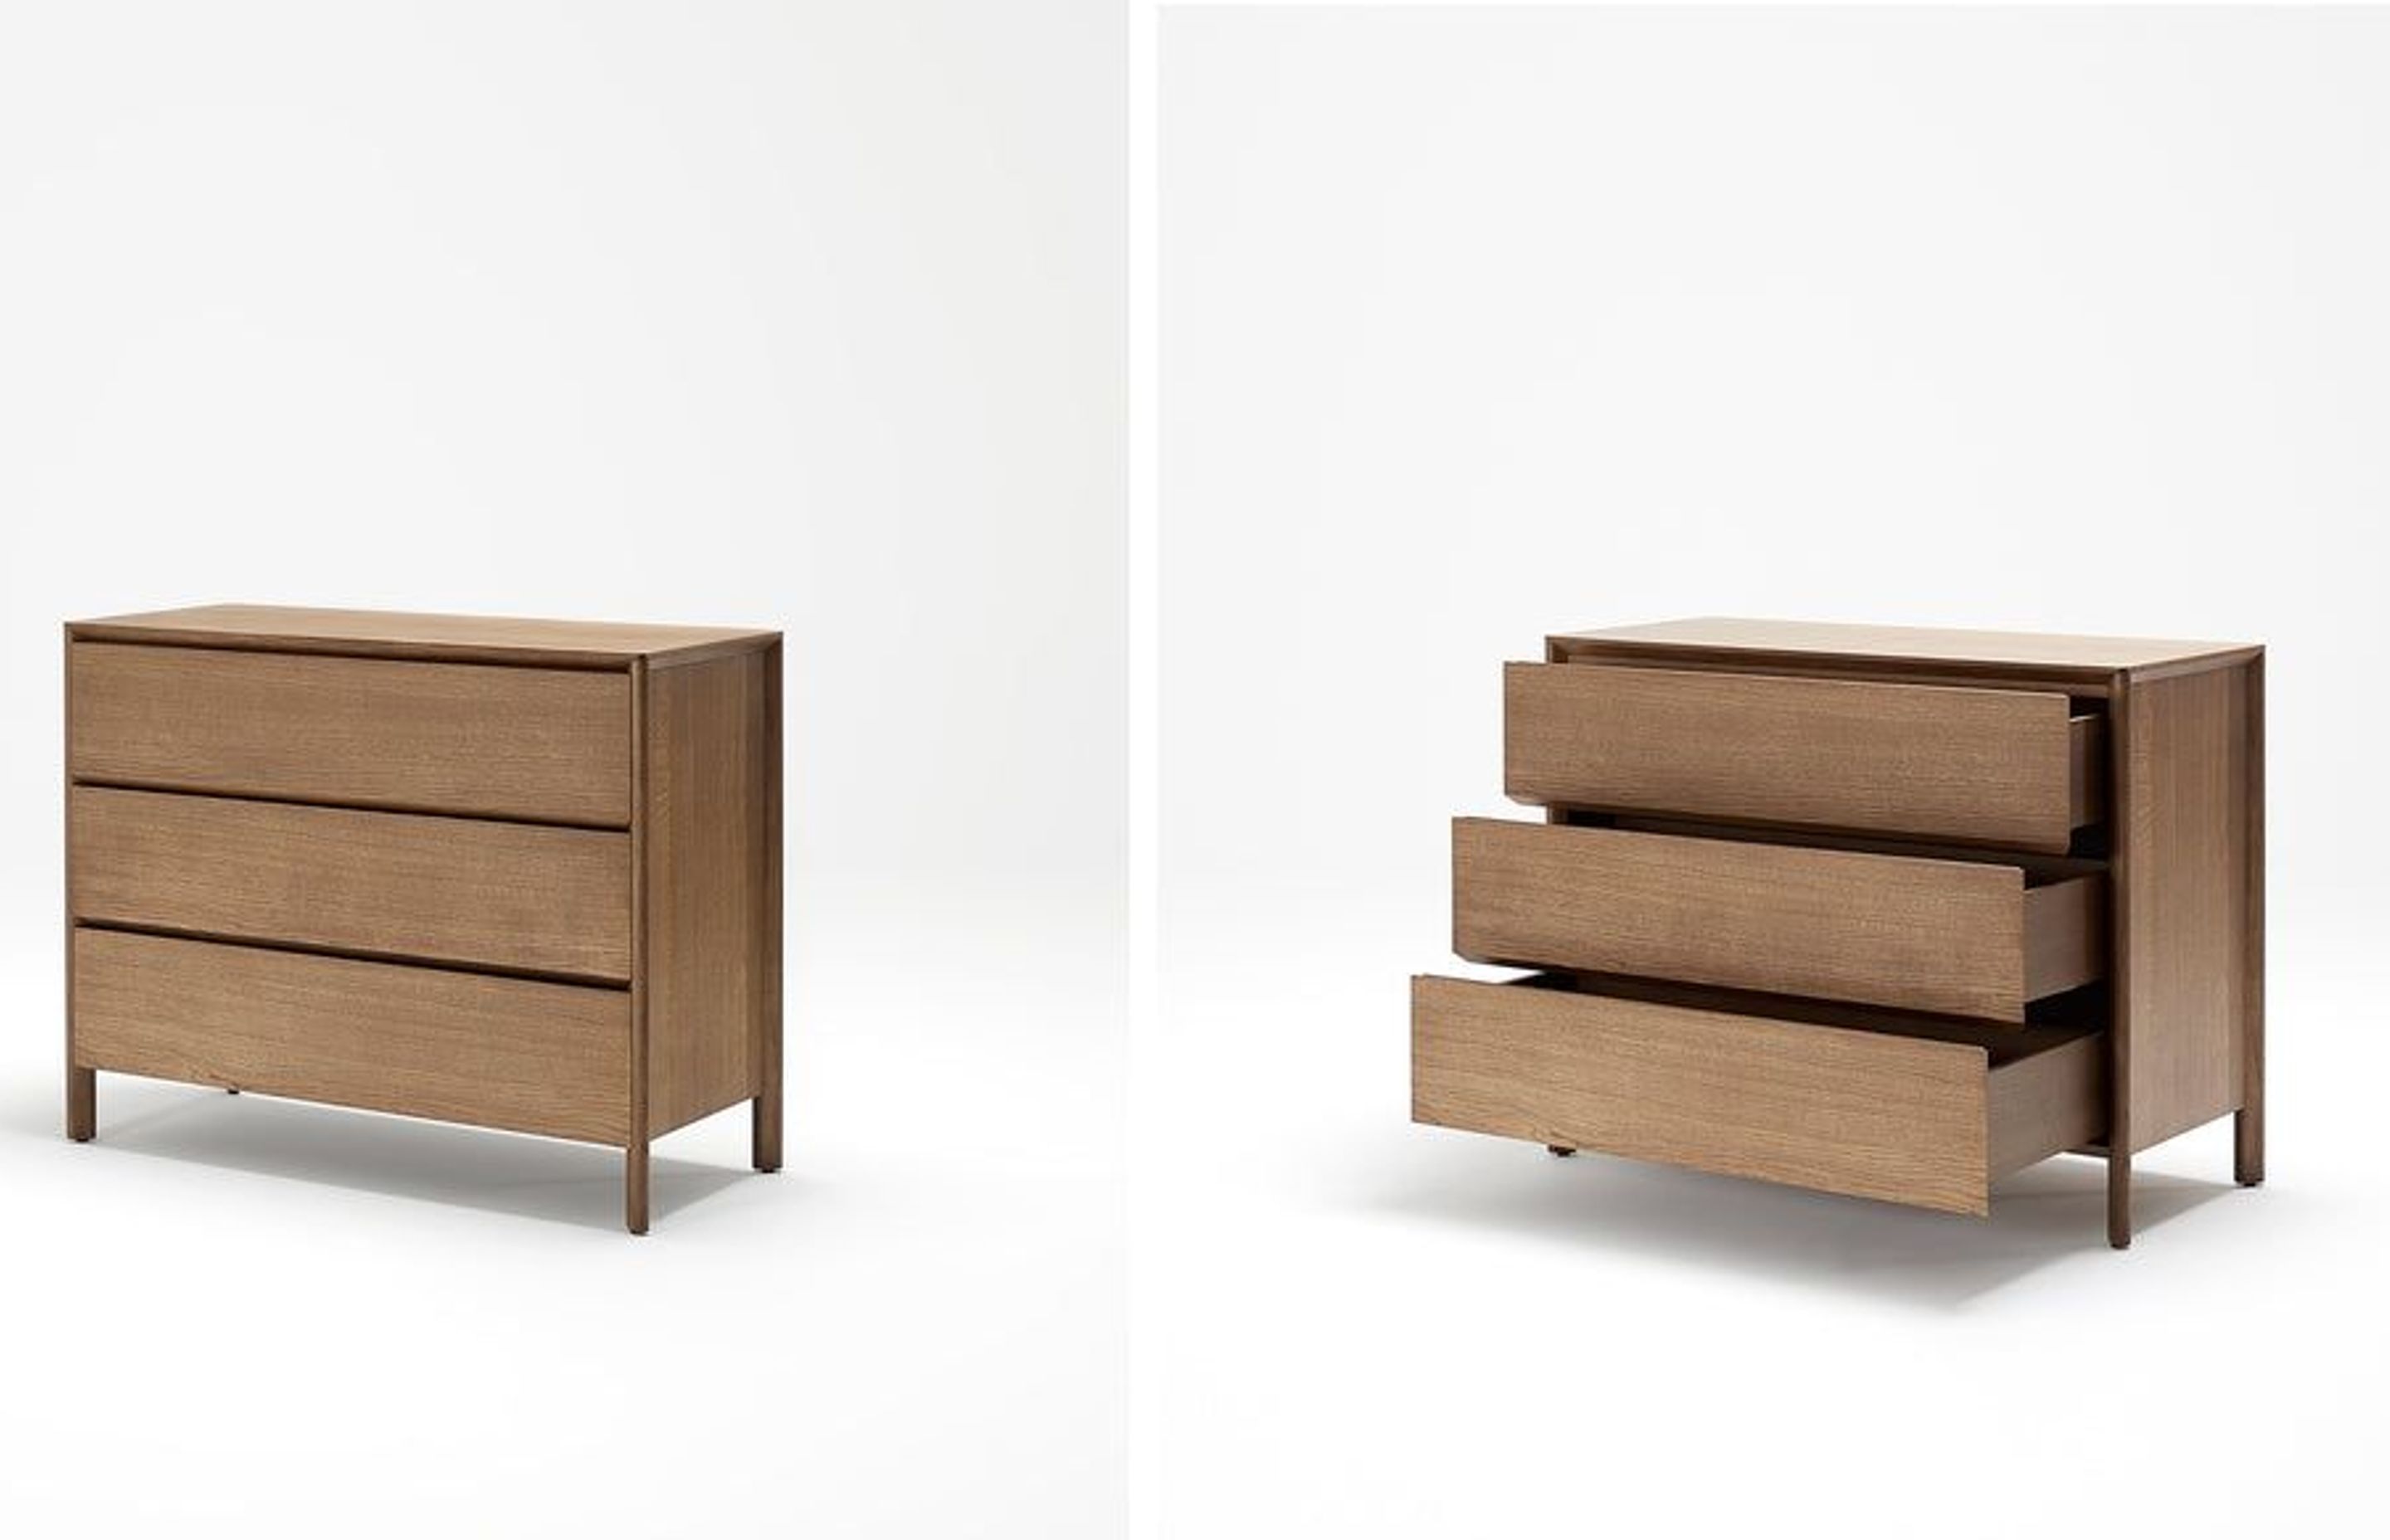 Otway Drawers pictured above in light walnut finish